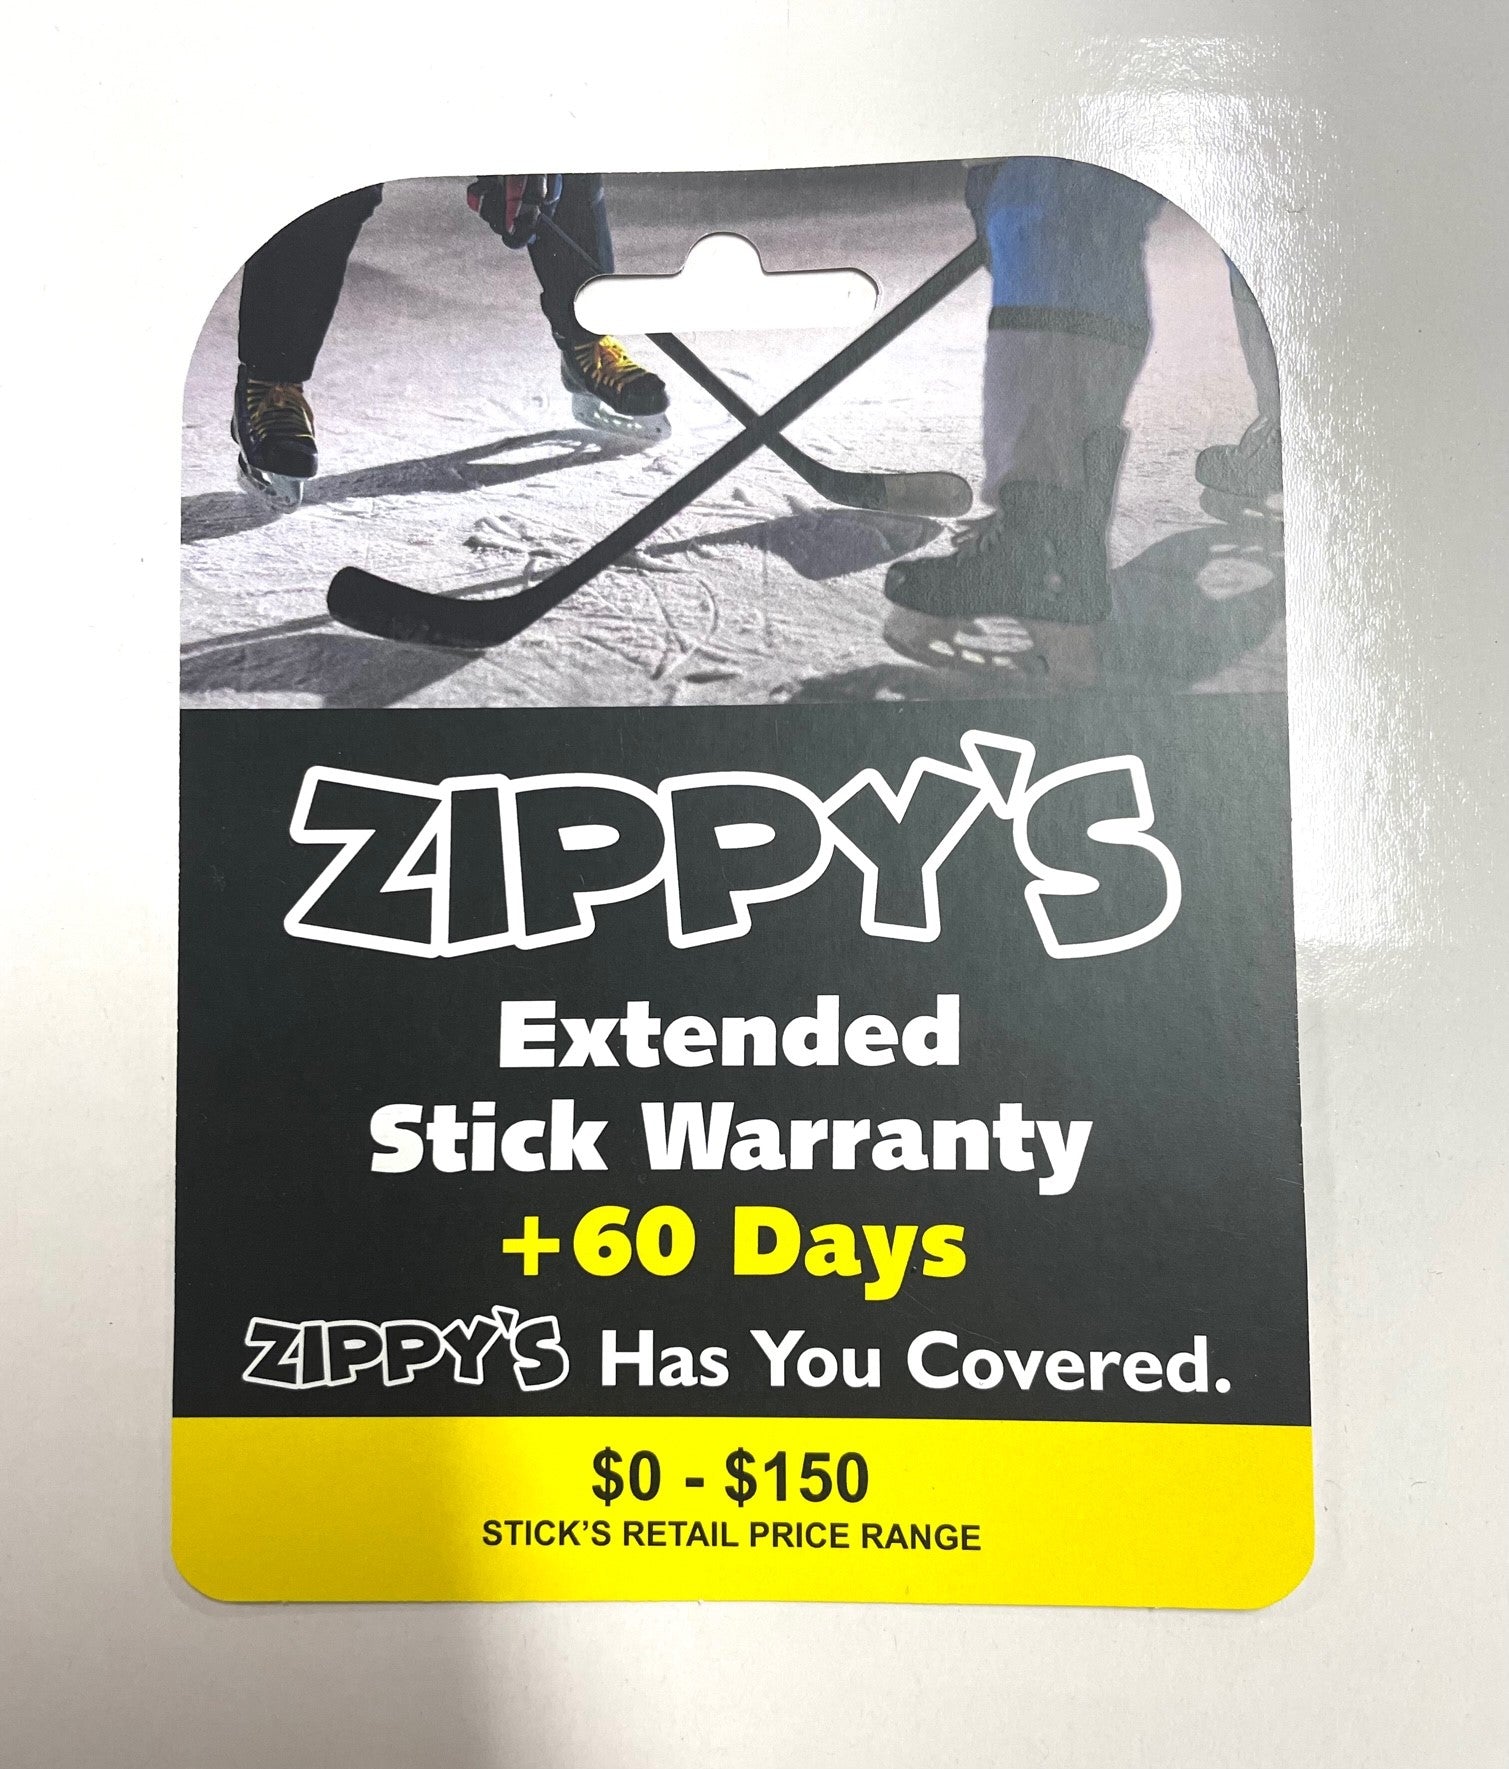 Zippy'S $0 - $150 Plus 60 Days Extended Warranty Stick $0 To 150.00 Must Have Manufactures Warranty-Zippy-Sports Replay - Sports Excellence